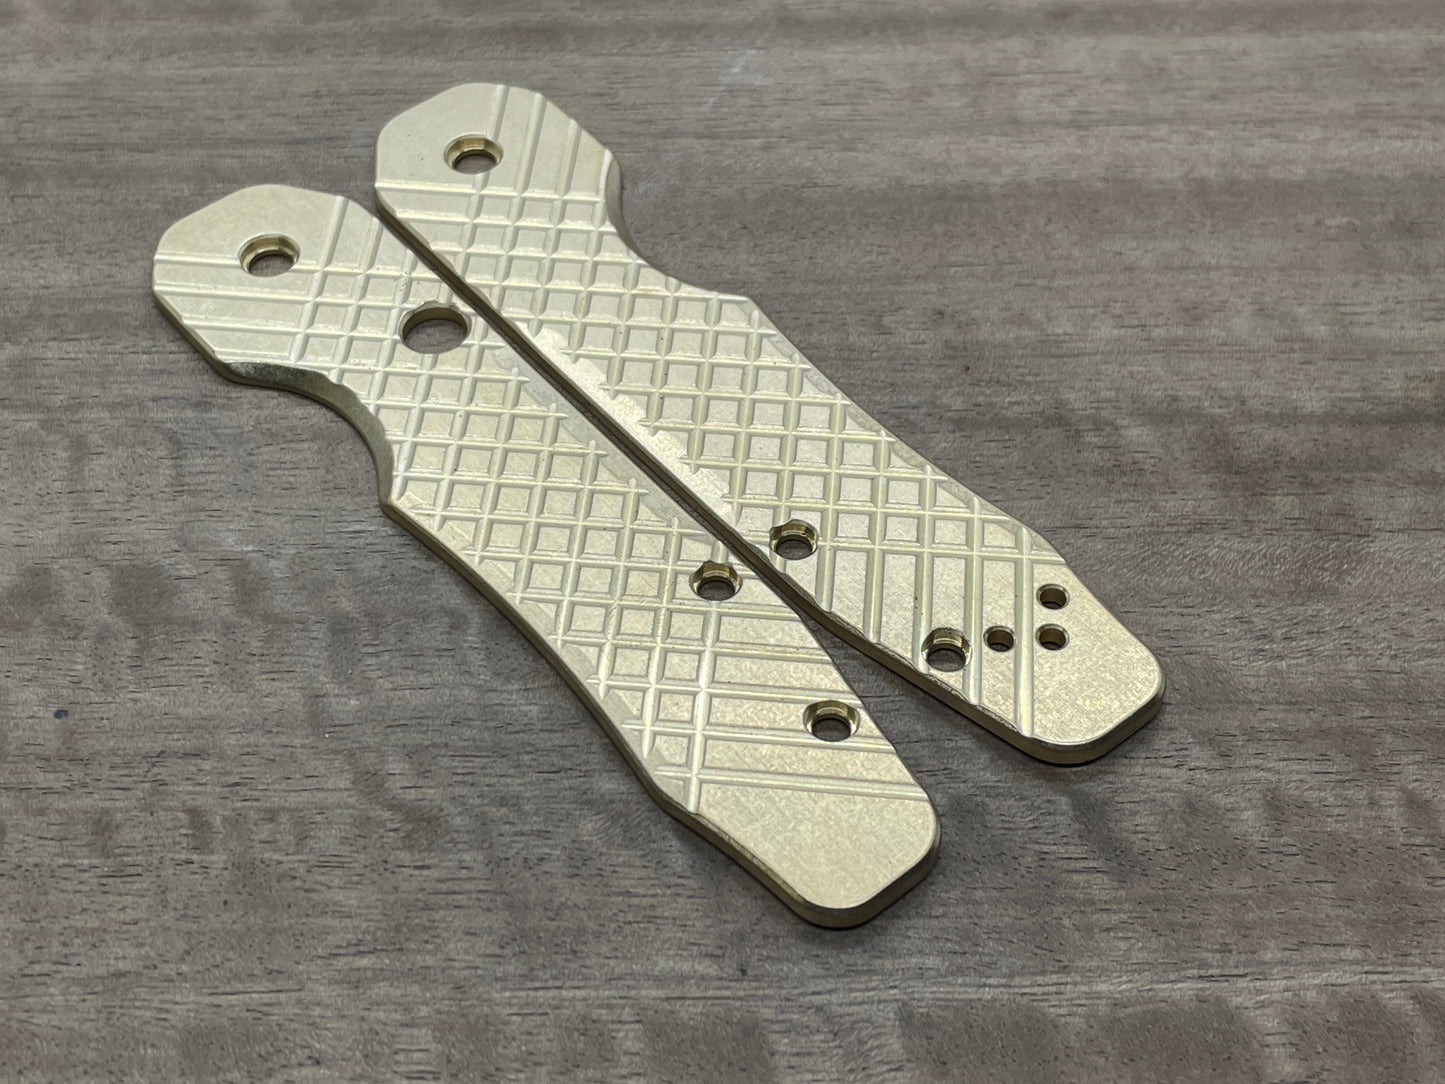 Brass FRAG milled Tumbled Scales for Spyderco SMOCK